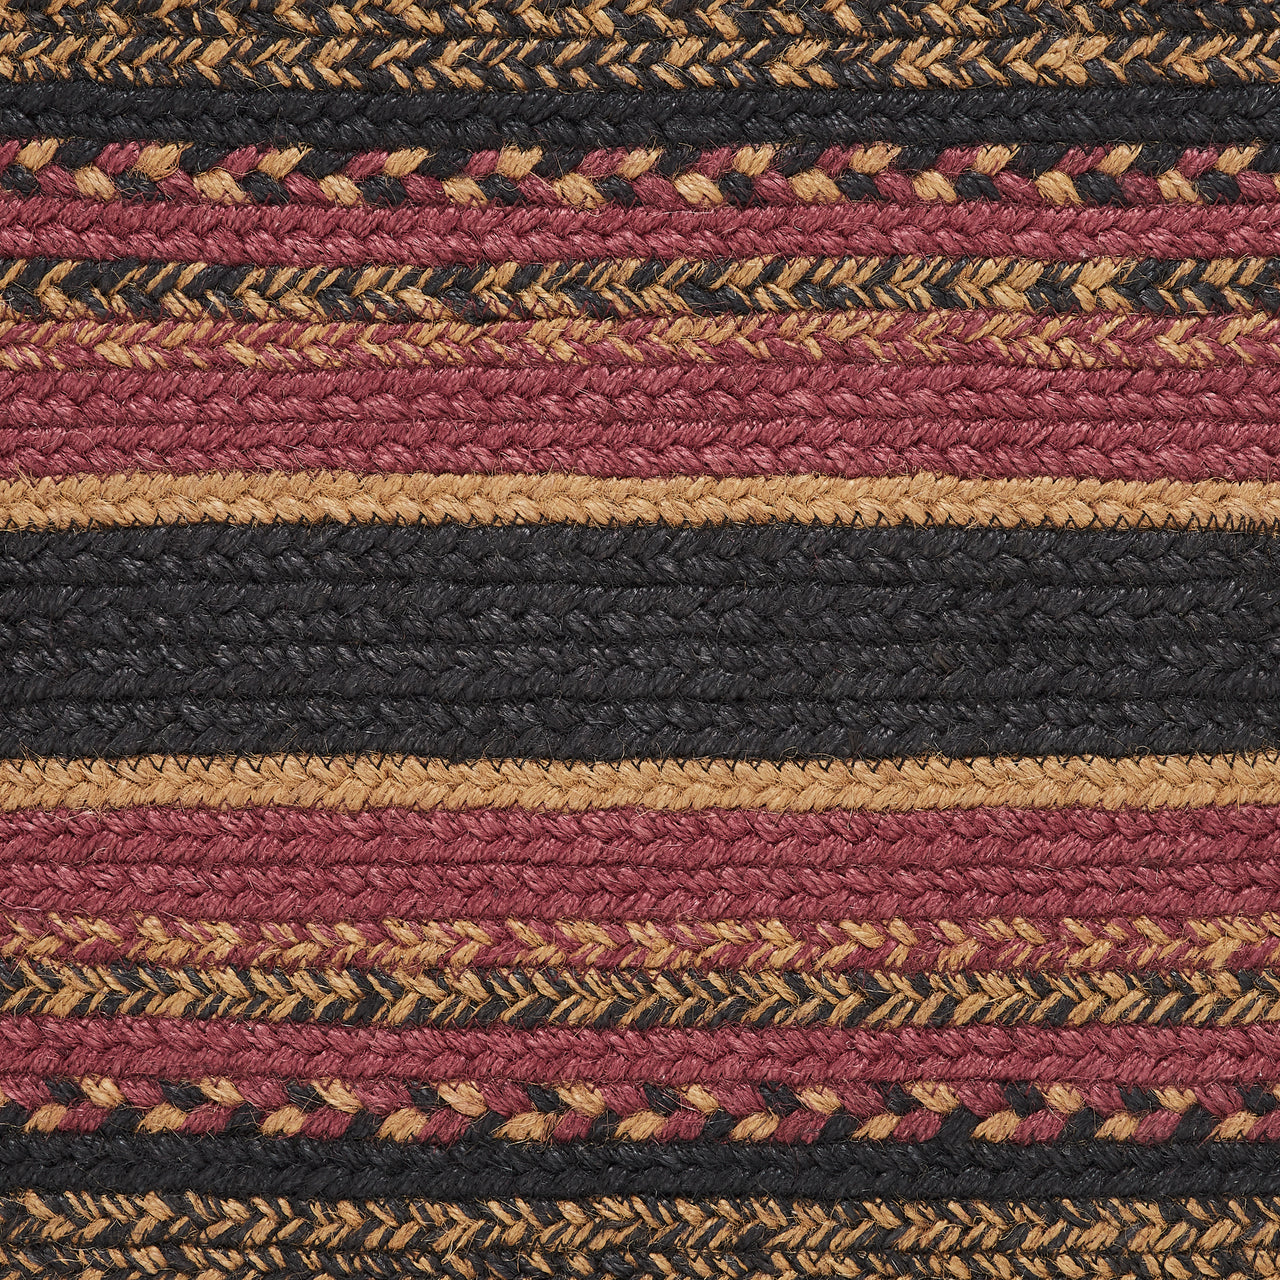 Heritage Farms Jute Braided Rug Rect. with Rug Pad 3'x5' VHC Brands